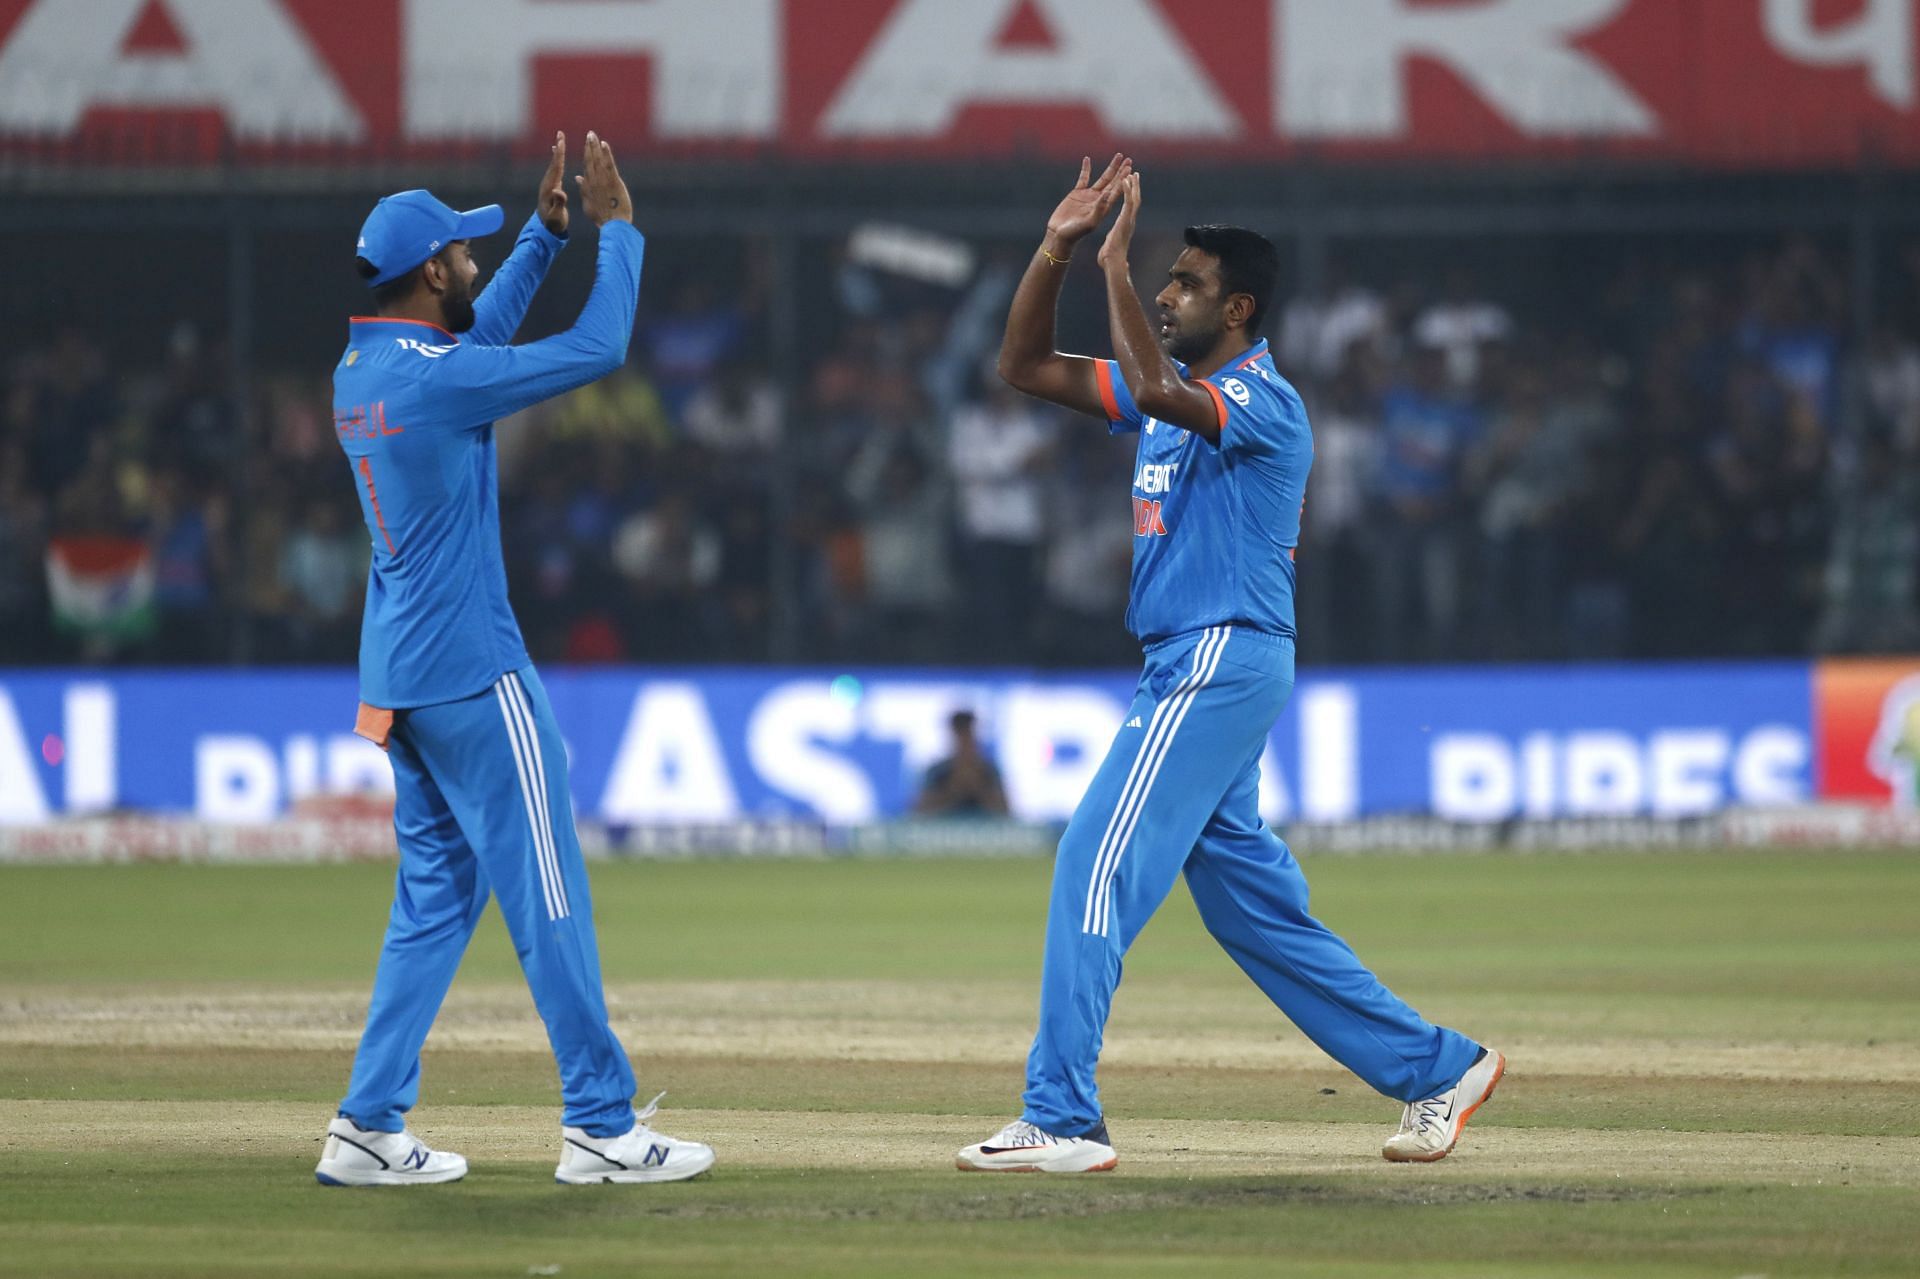 Ravichandran Ashwin (right) during the Indore ODI against Australia. (Pic: Getty Images)